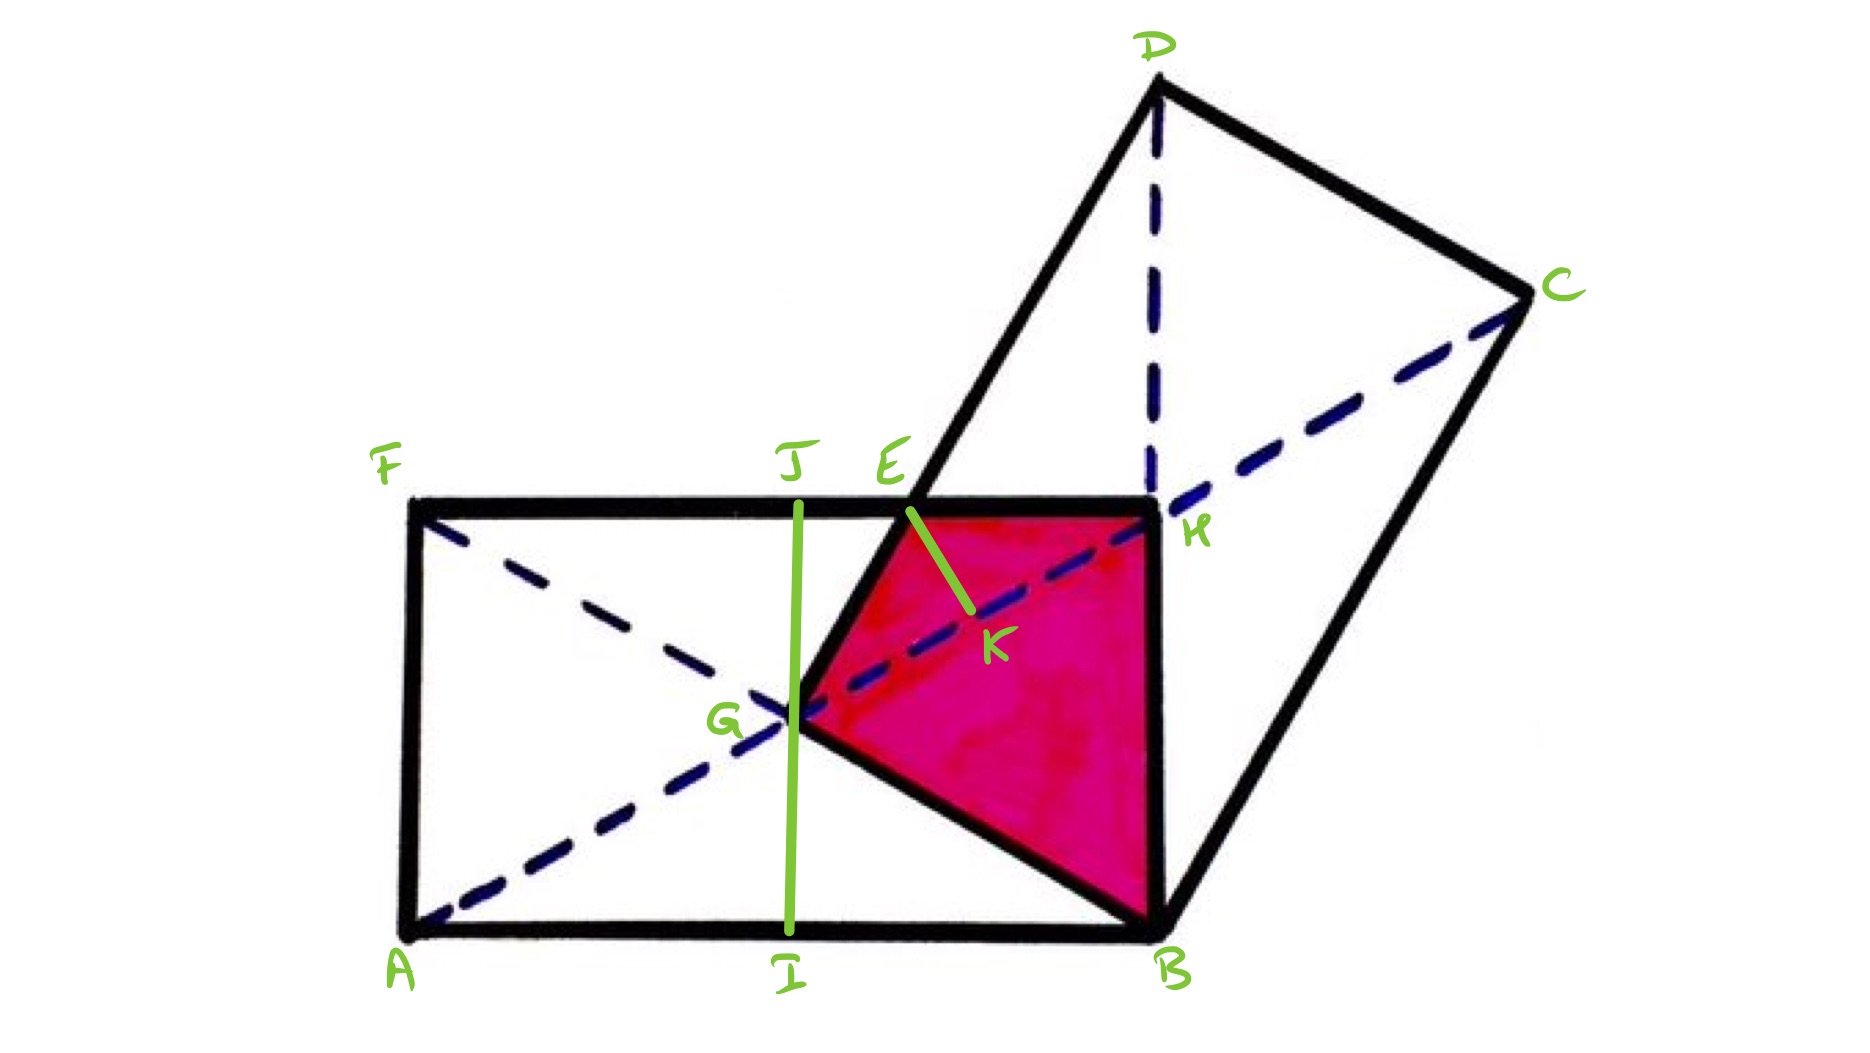 Two rectangles with diagonals labelled